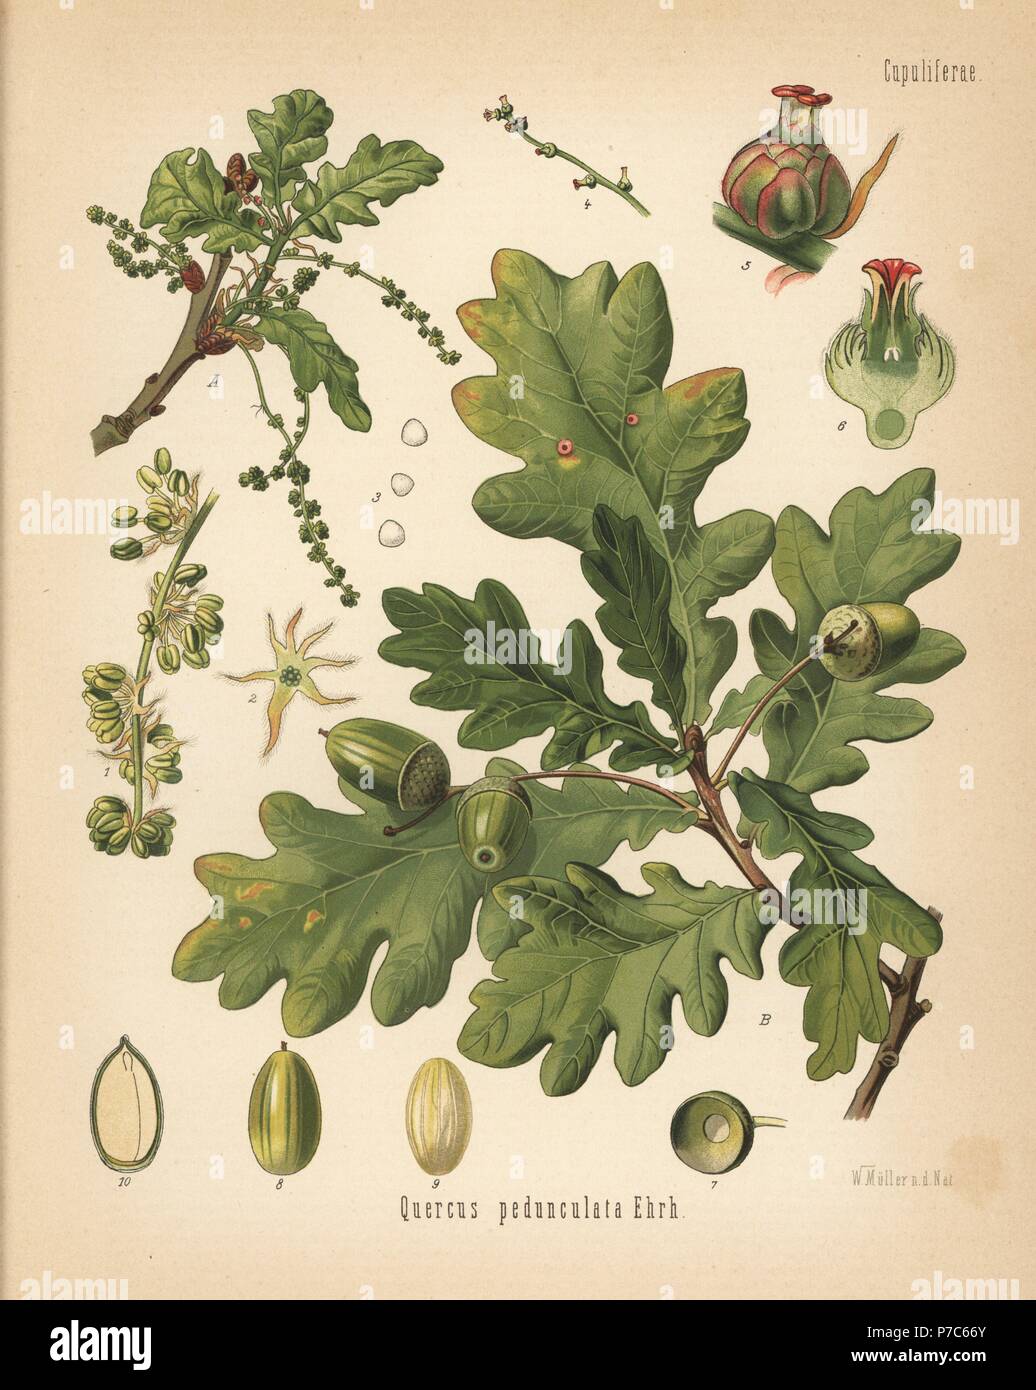 English oak or pedunculate oak, Quercus robur (Quercus pedunculata). Chromolithograph after a botanical illustration by Walther Muller from Hermann Adolph Koehler's Medicinal Plants, edited by Gustav Pabst, Koehler, Germany, 1887. Stock Photo